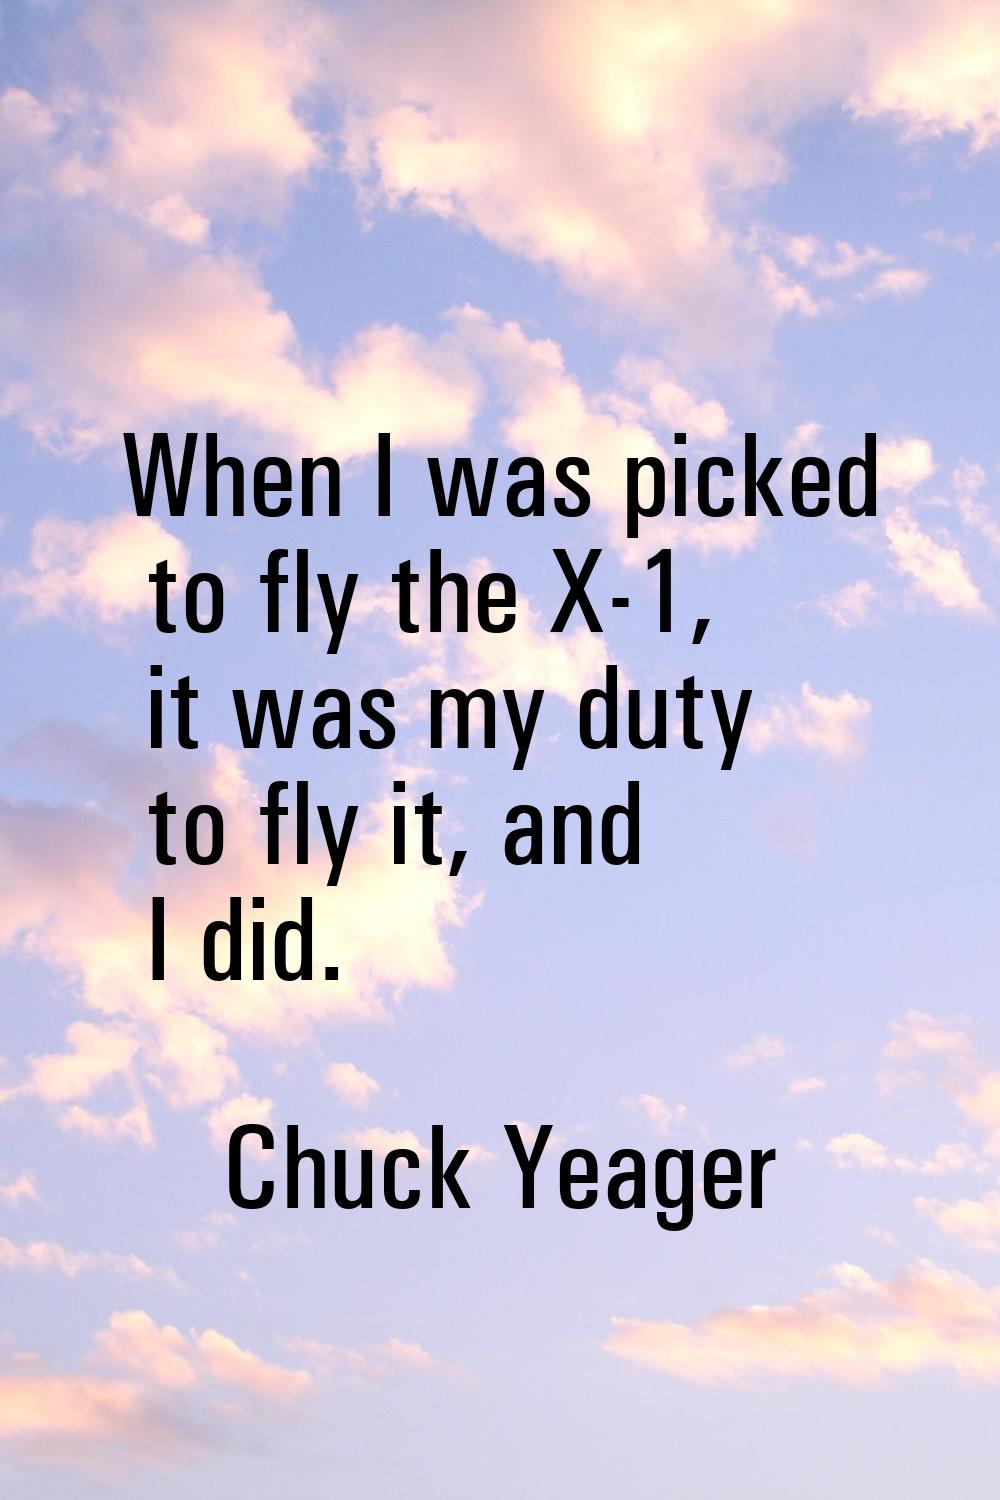 When I was picked to fly the X-1, it was my duty to fly it, and I did.